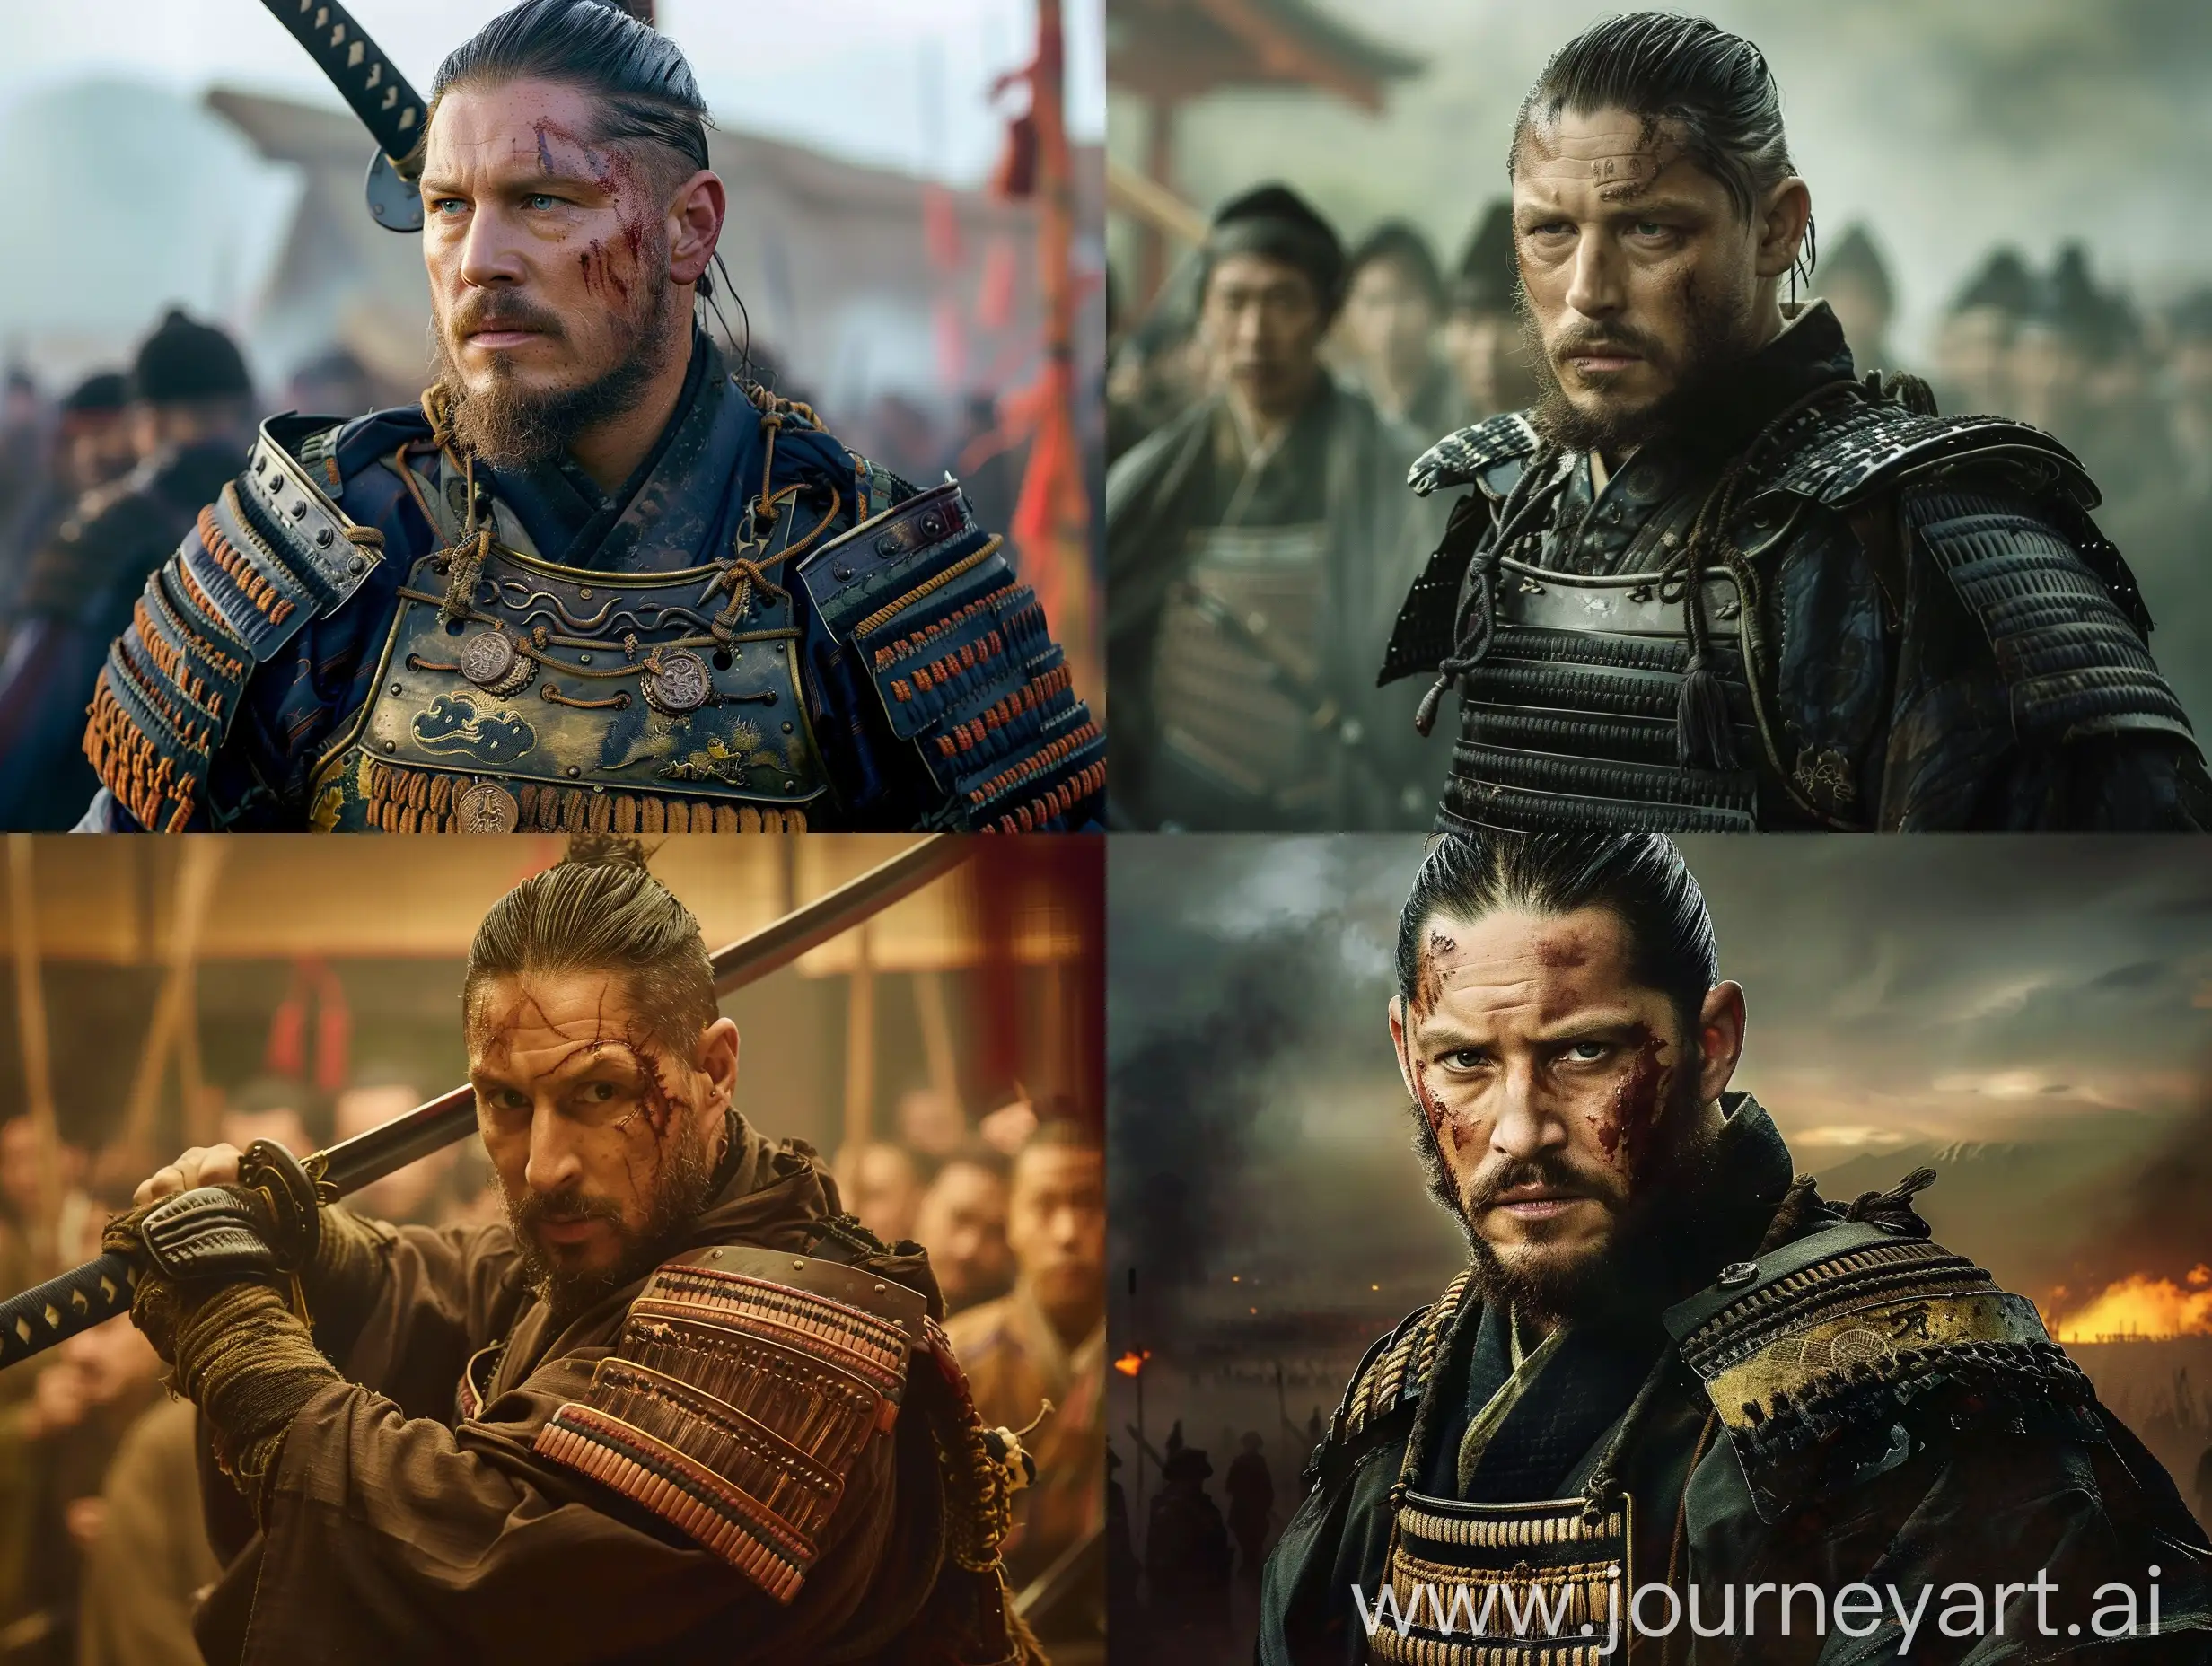 Tom-Hardy-as-Shogun-Portrayal-of-the-Japanese-Warlord-in-1600